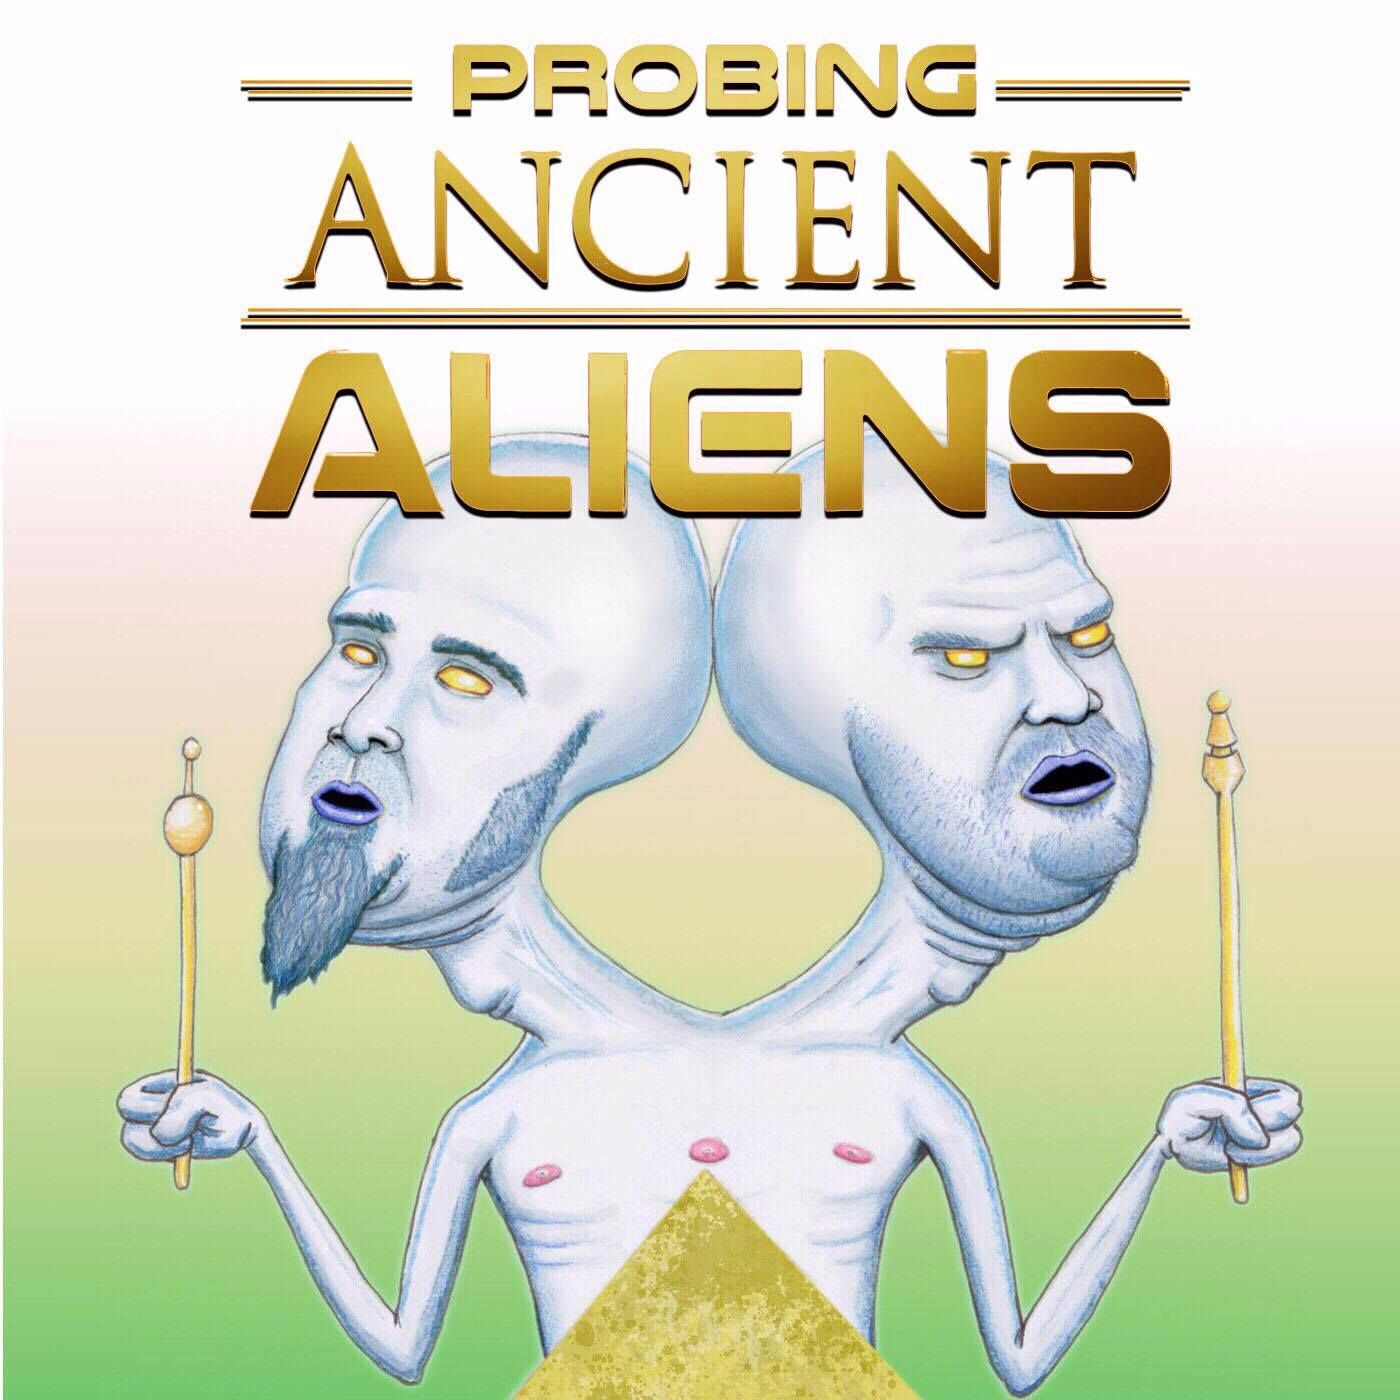 Probing Ancient Aliens podcast